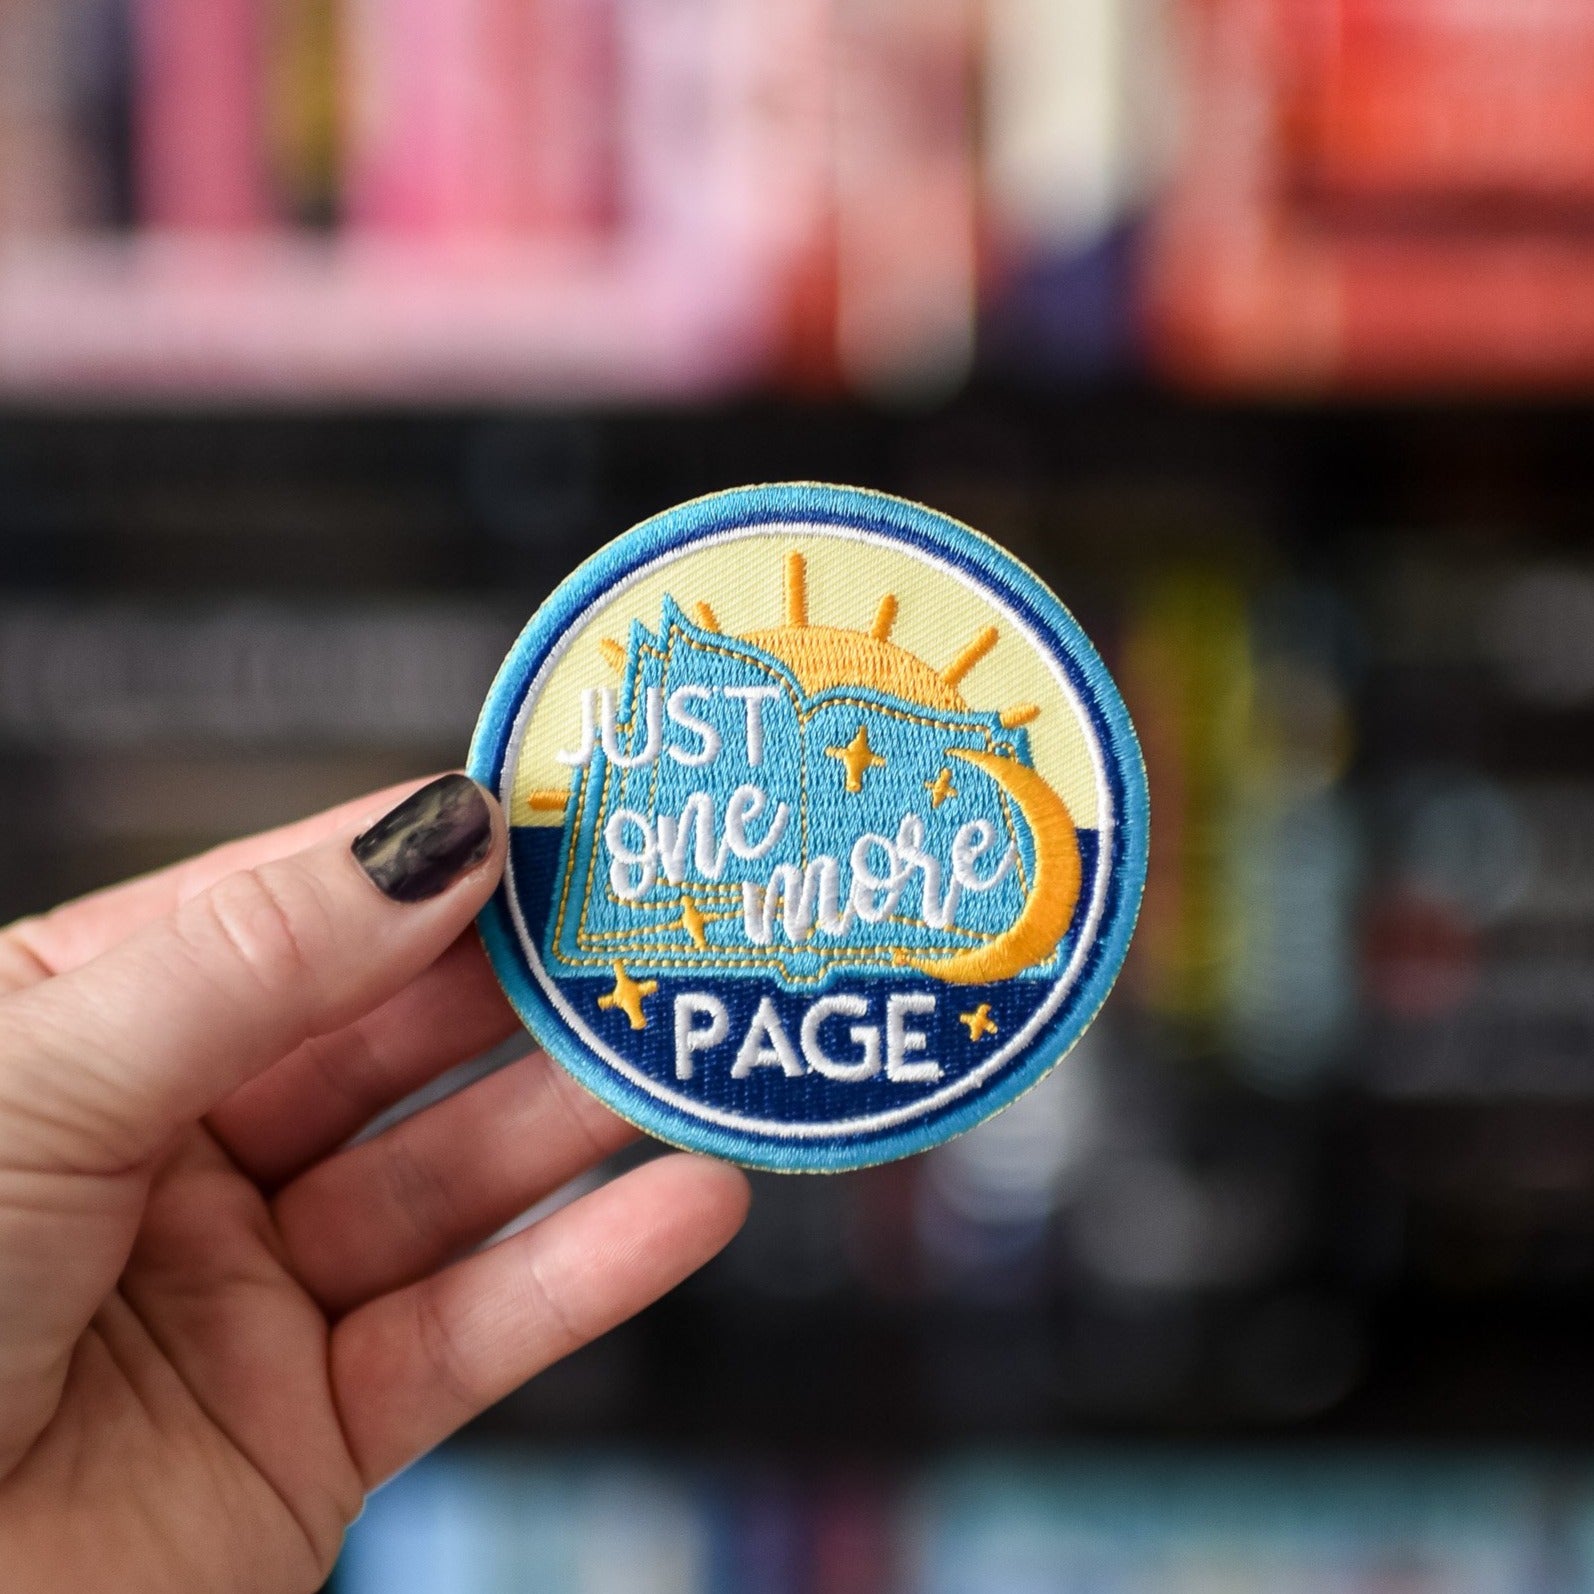 One More Page Patch is blue, yellow and white with a book, sun and moon and stars, and the words "Just One More Page"